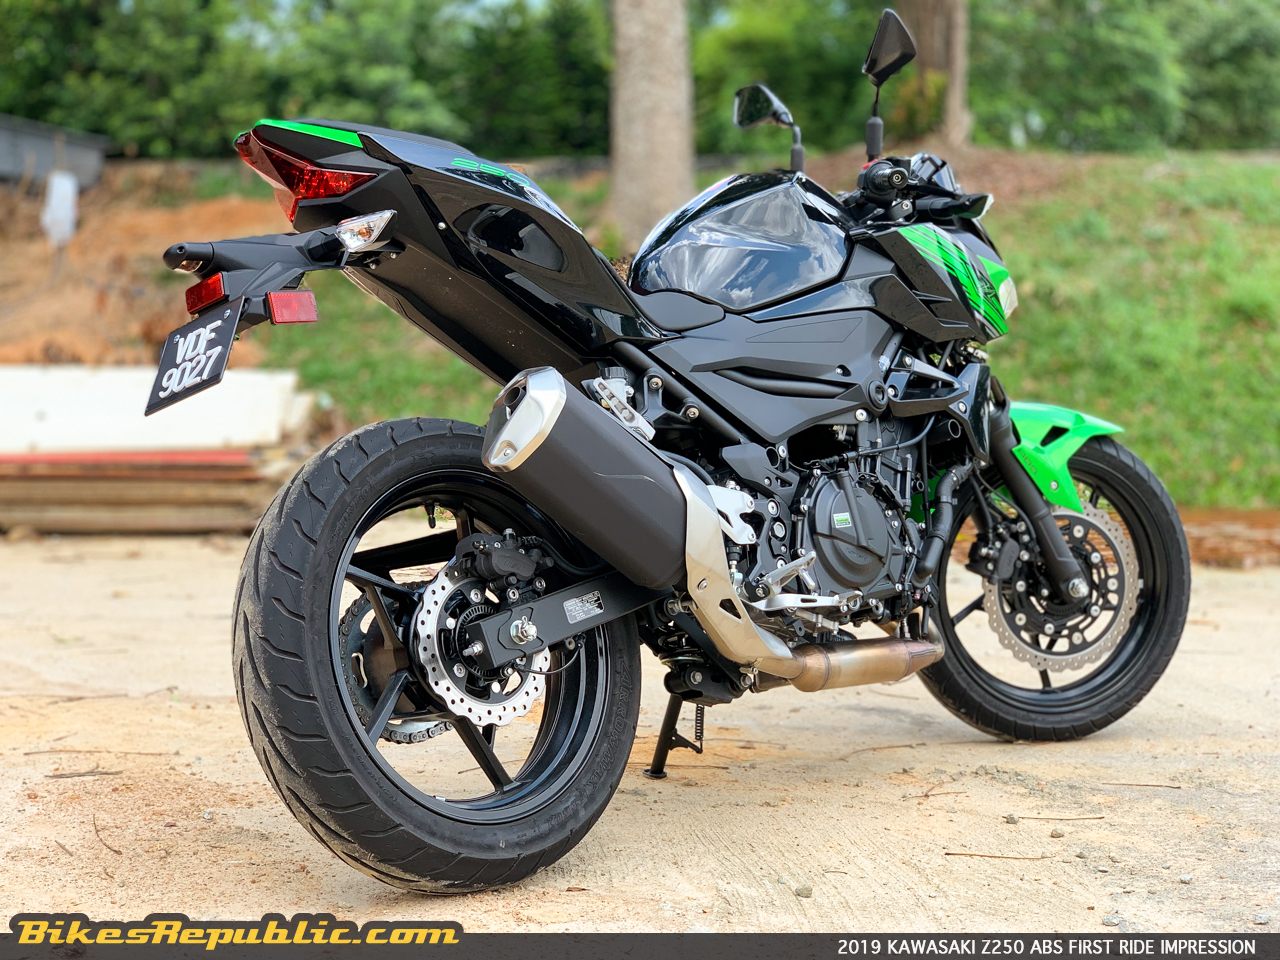 2019 Kawasaki Z250 ABS First Ride Review - Motorcycle news, Motorcycle reviews Malaysia, Asia and the - BikesRepublic.com